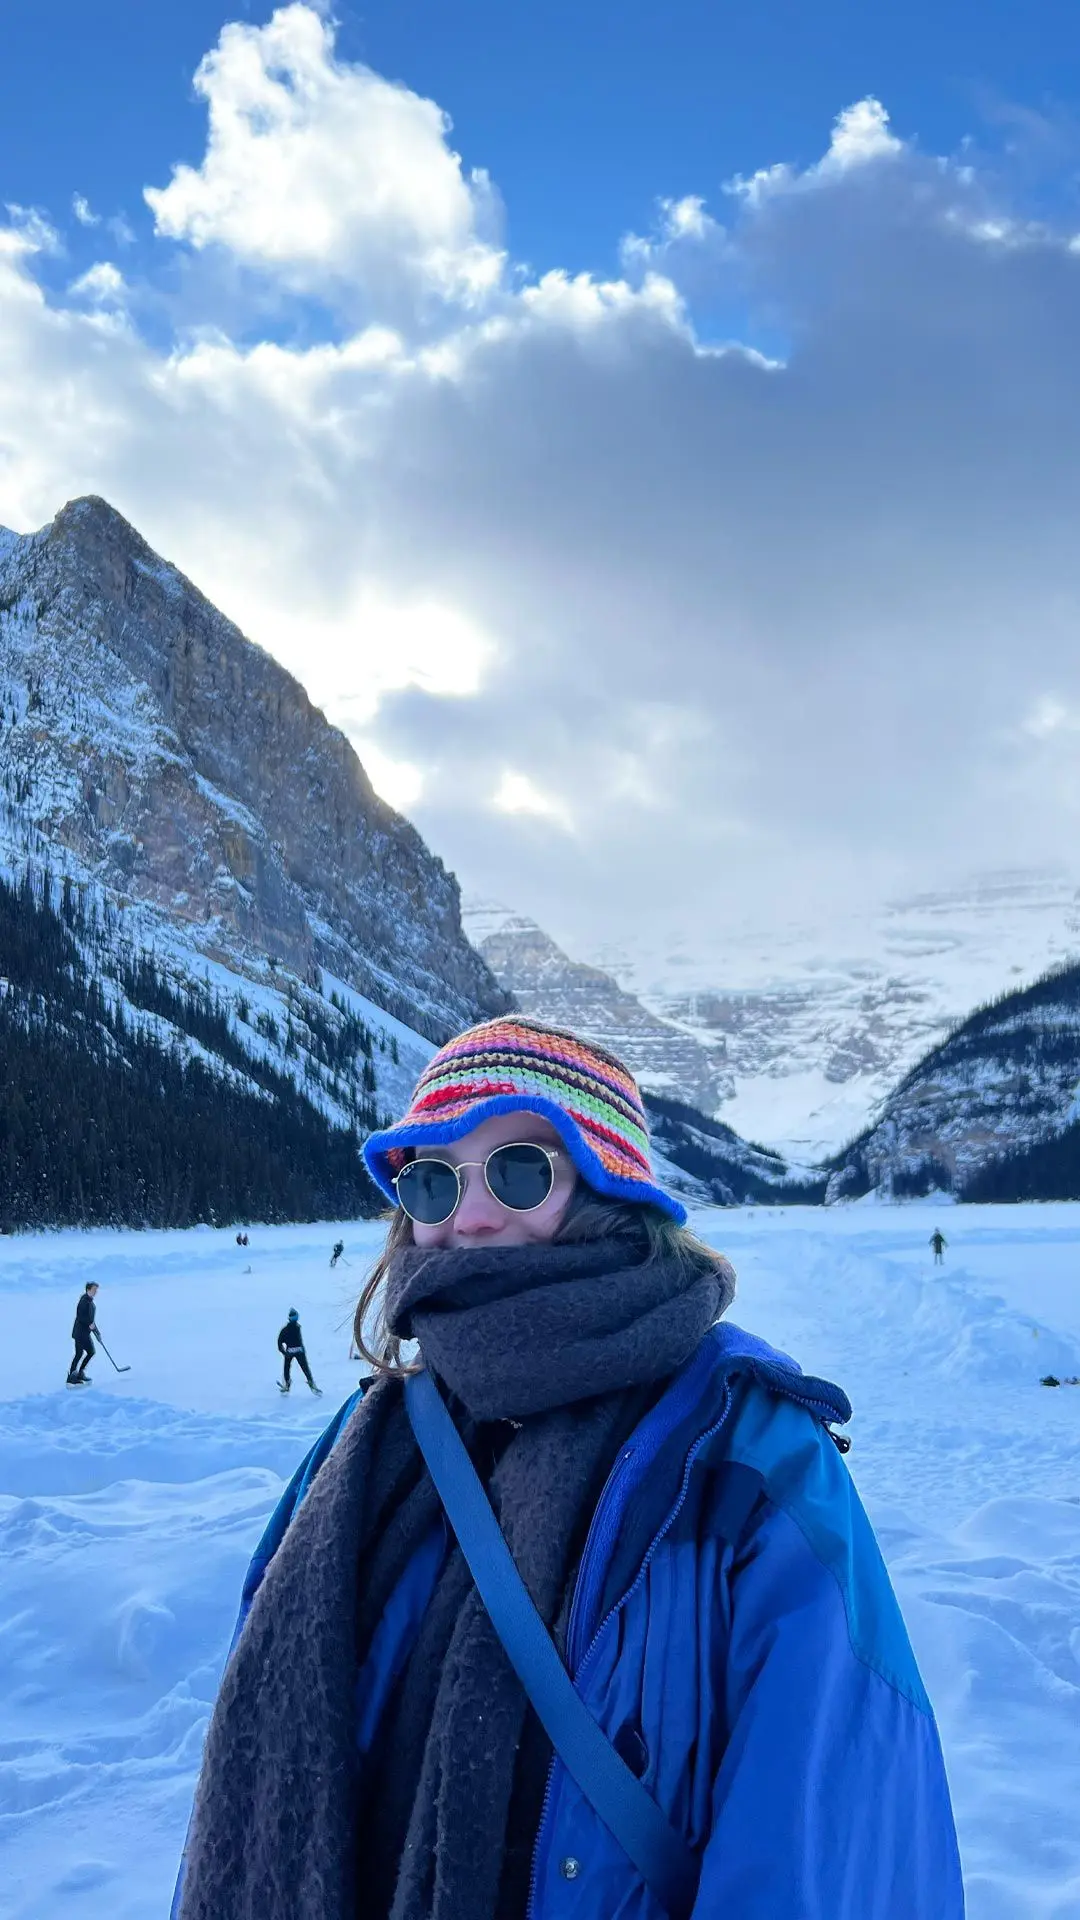 Taking a ski selfie on a snowy mountain - from Ethan Walsweer via Unsplash